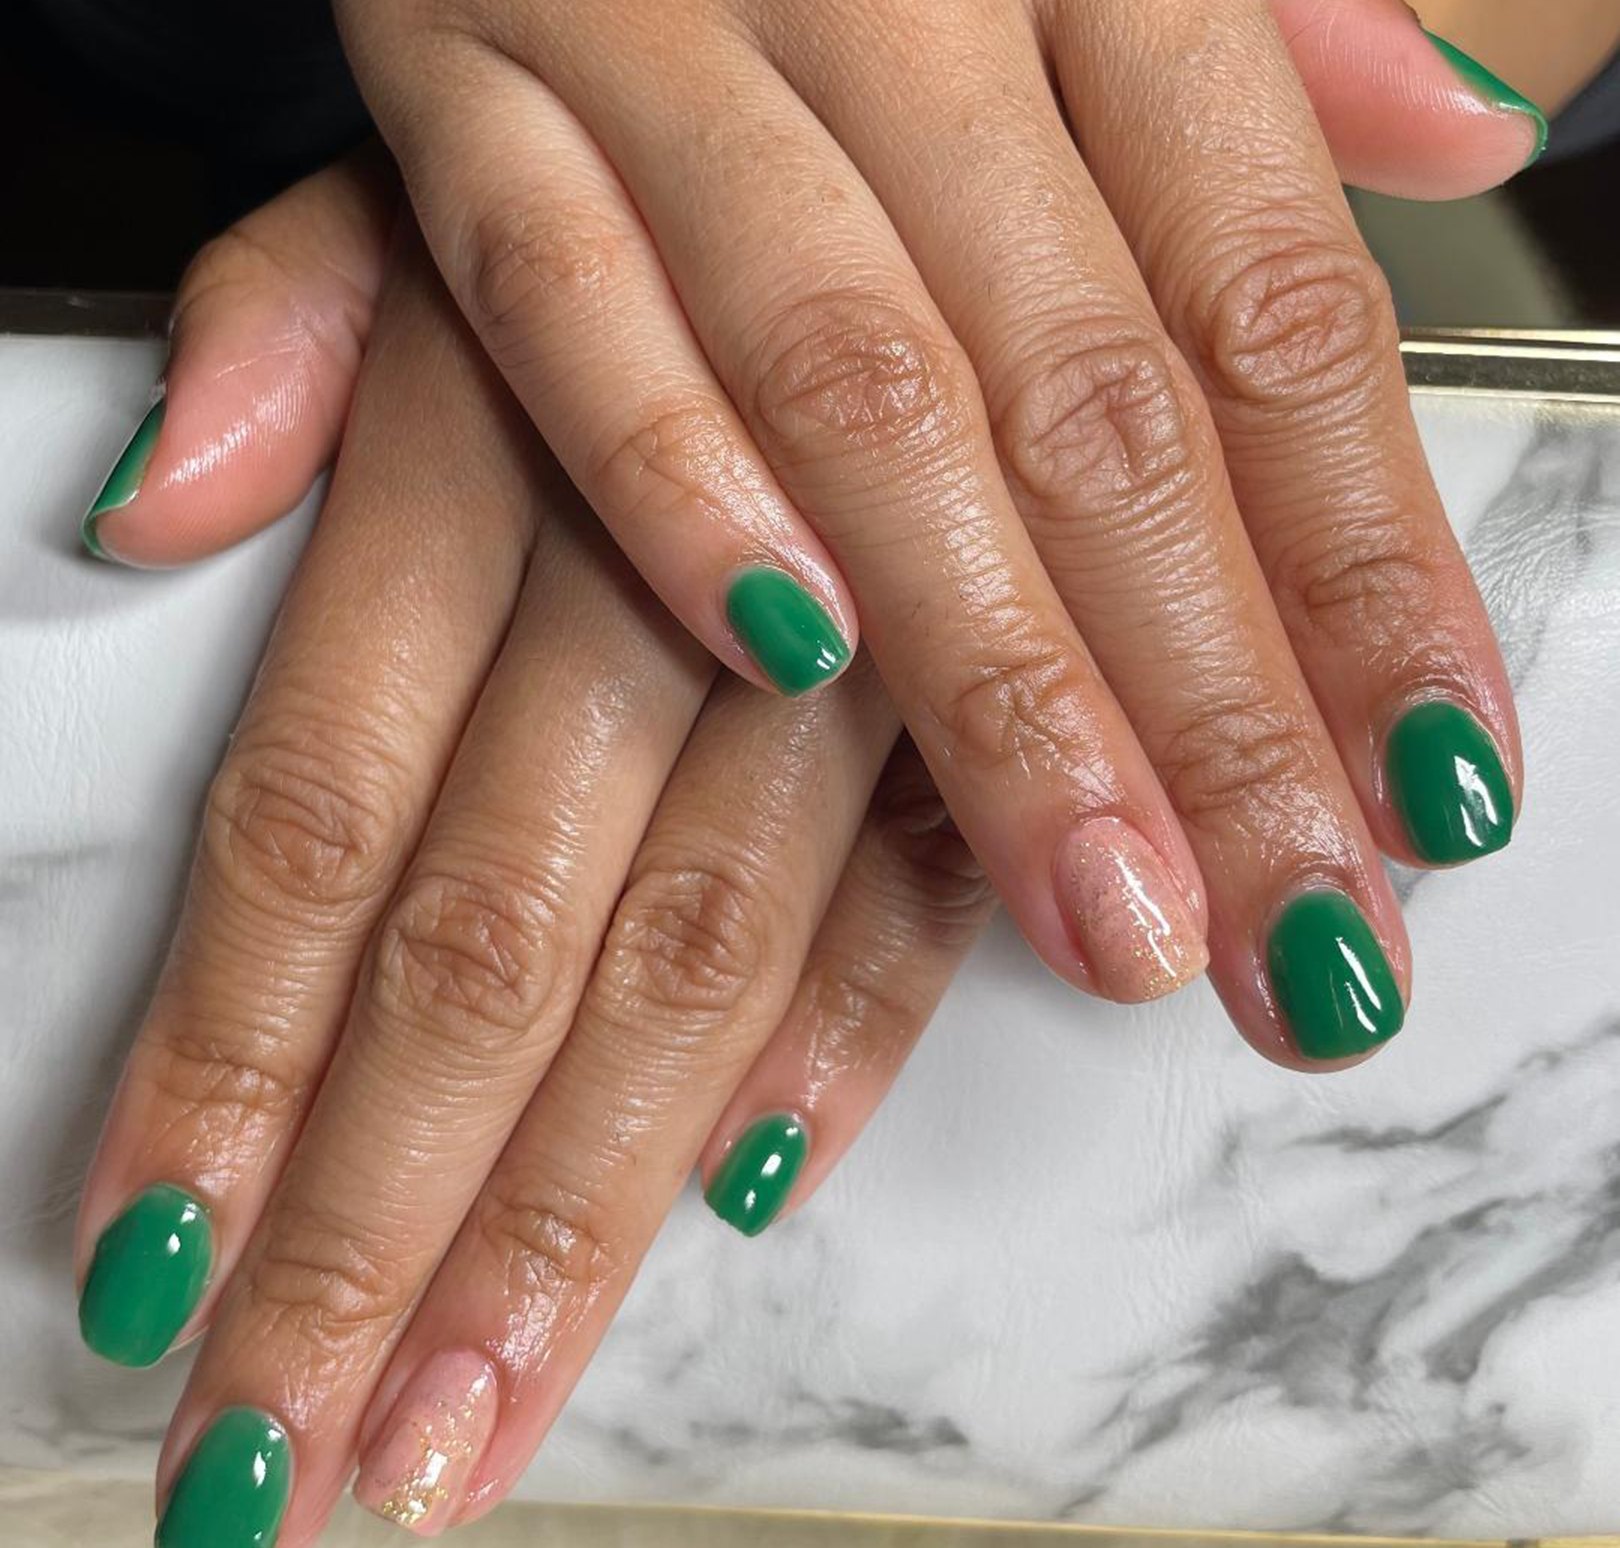 Hands of a laina woman on top of each other on a table with mylar on her ring finger nails and green color gel polish on the rest of the finger nails of borth hands